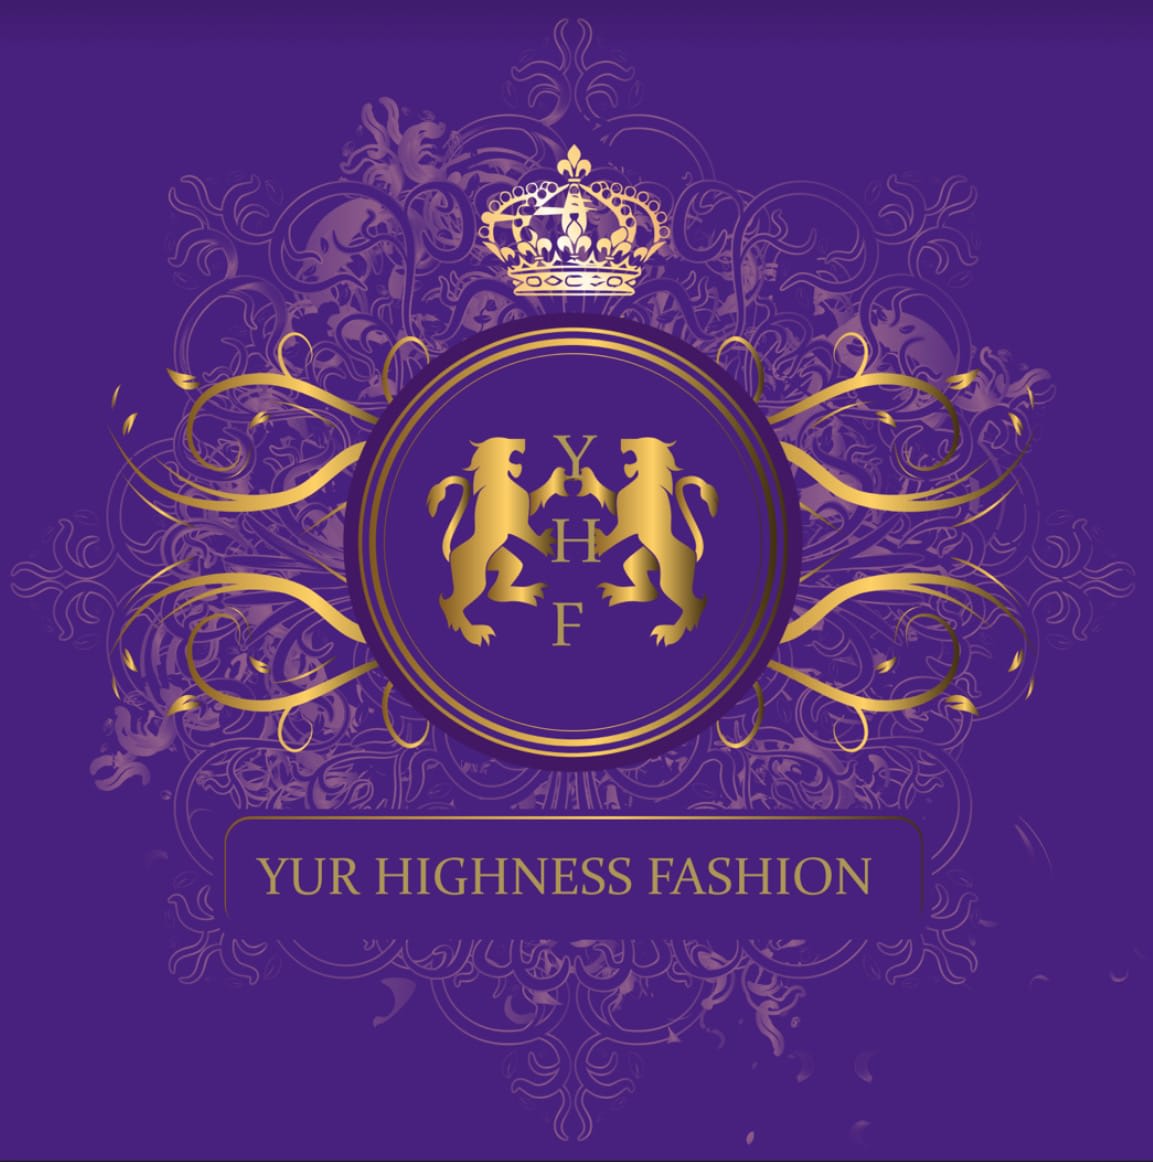 YHF StyleMe Services